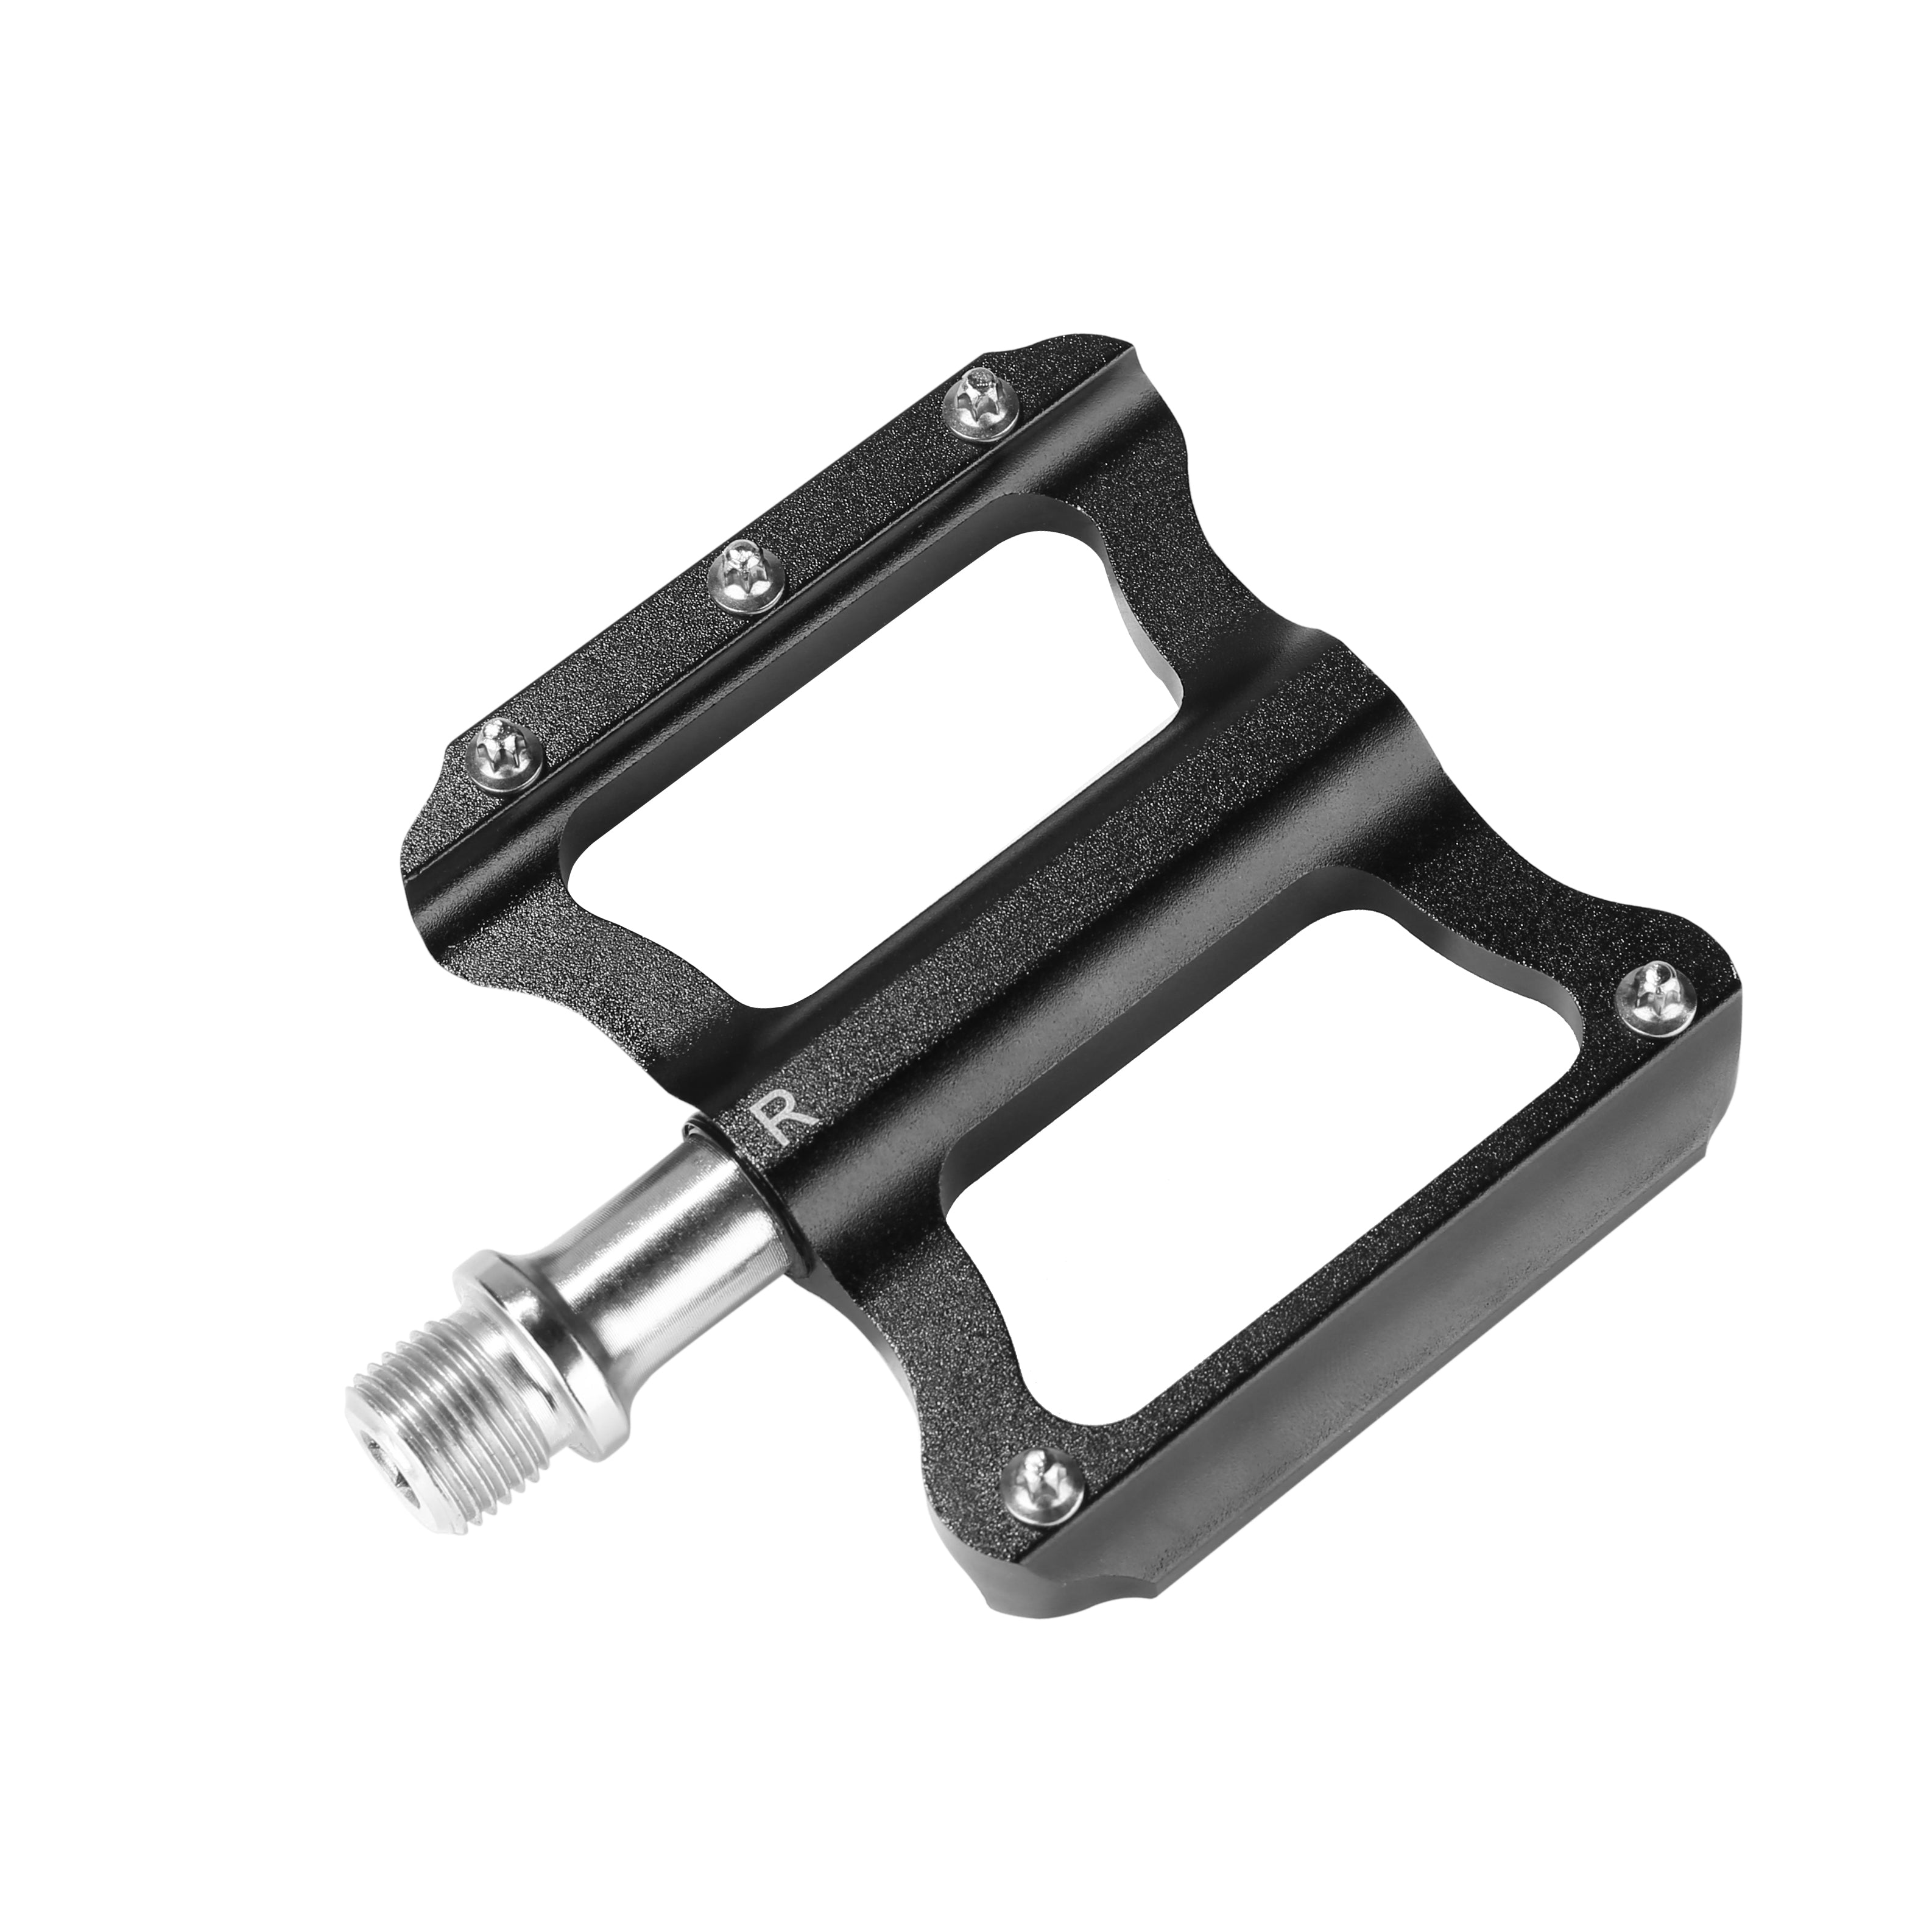 Aluminum Alloy Pedals - Belsize Official Sporting Goods > Outdoor Recreation > Cycling > Bicycles